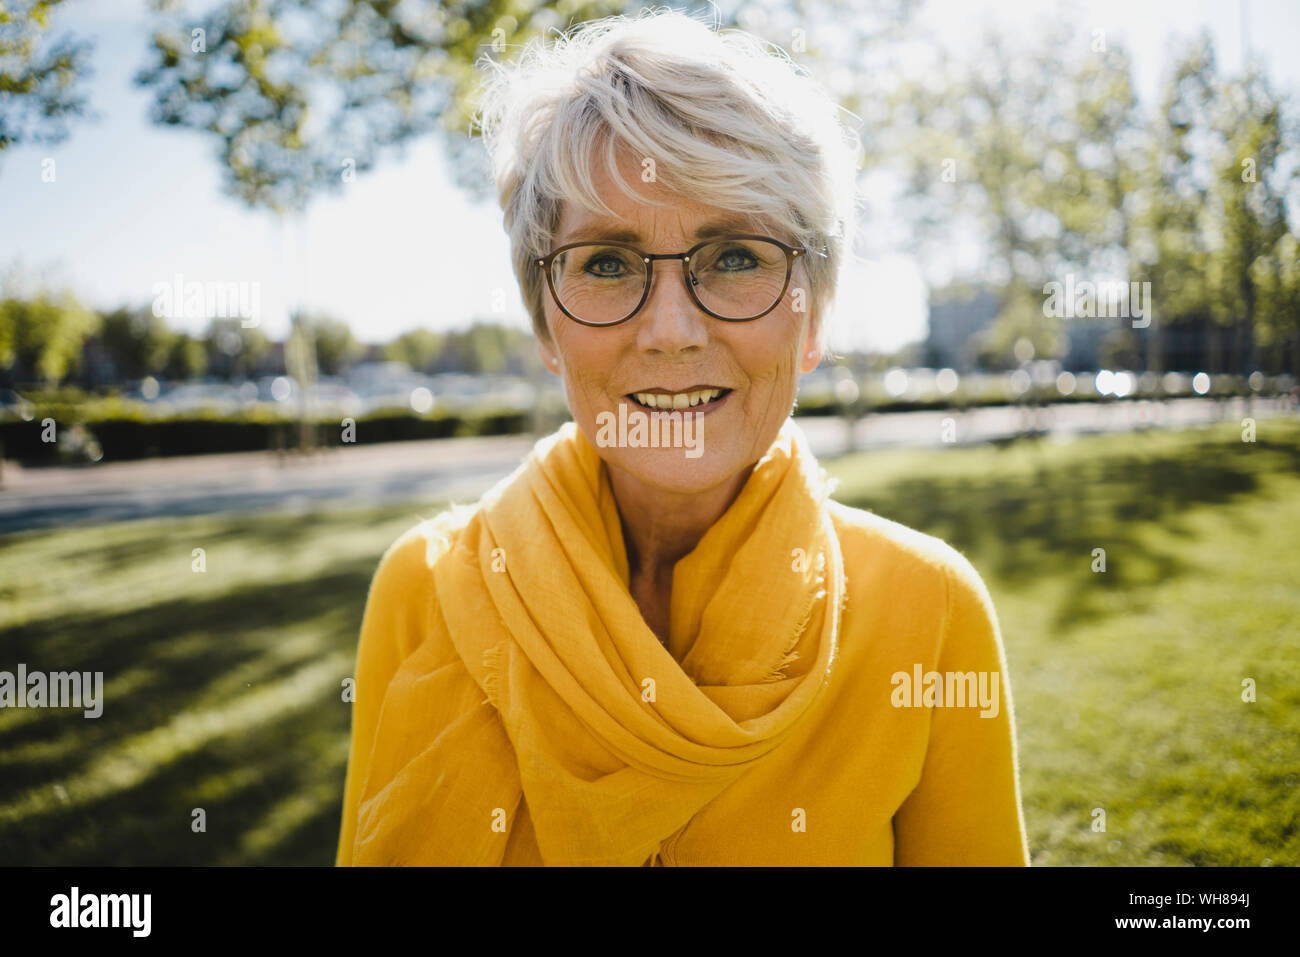 Portrait of smiling mature woman with grey hair wearing glasses and yellow clothes Stock Photo